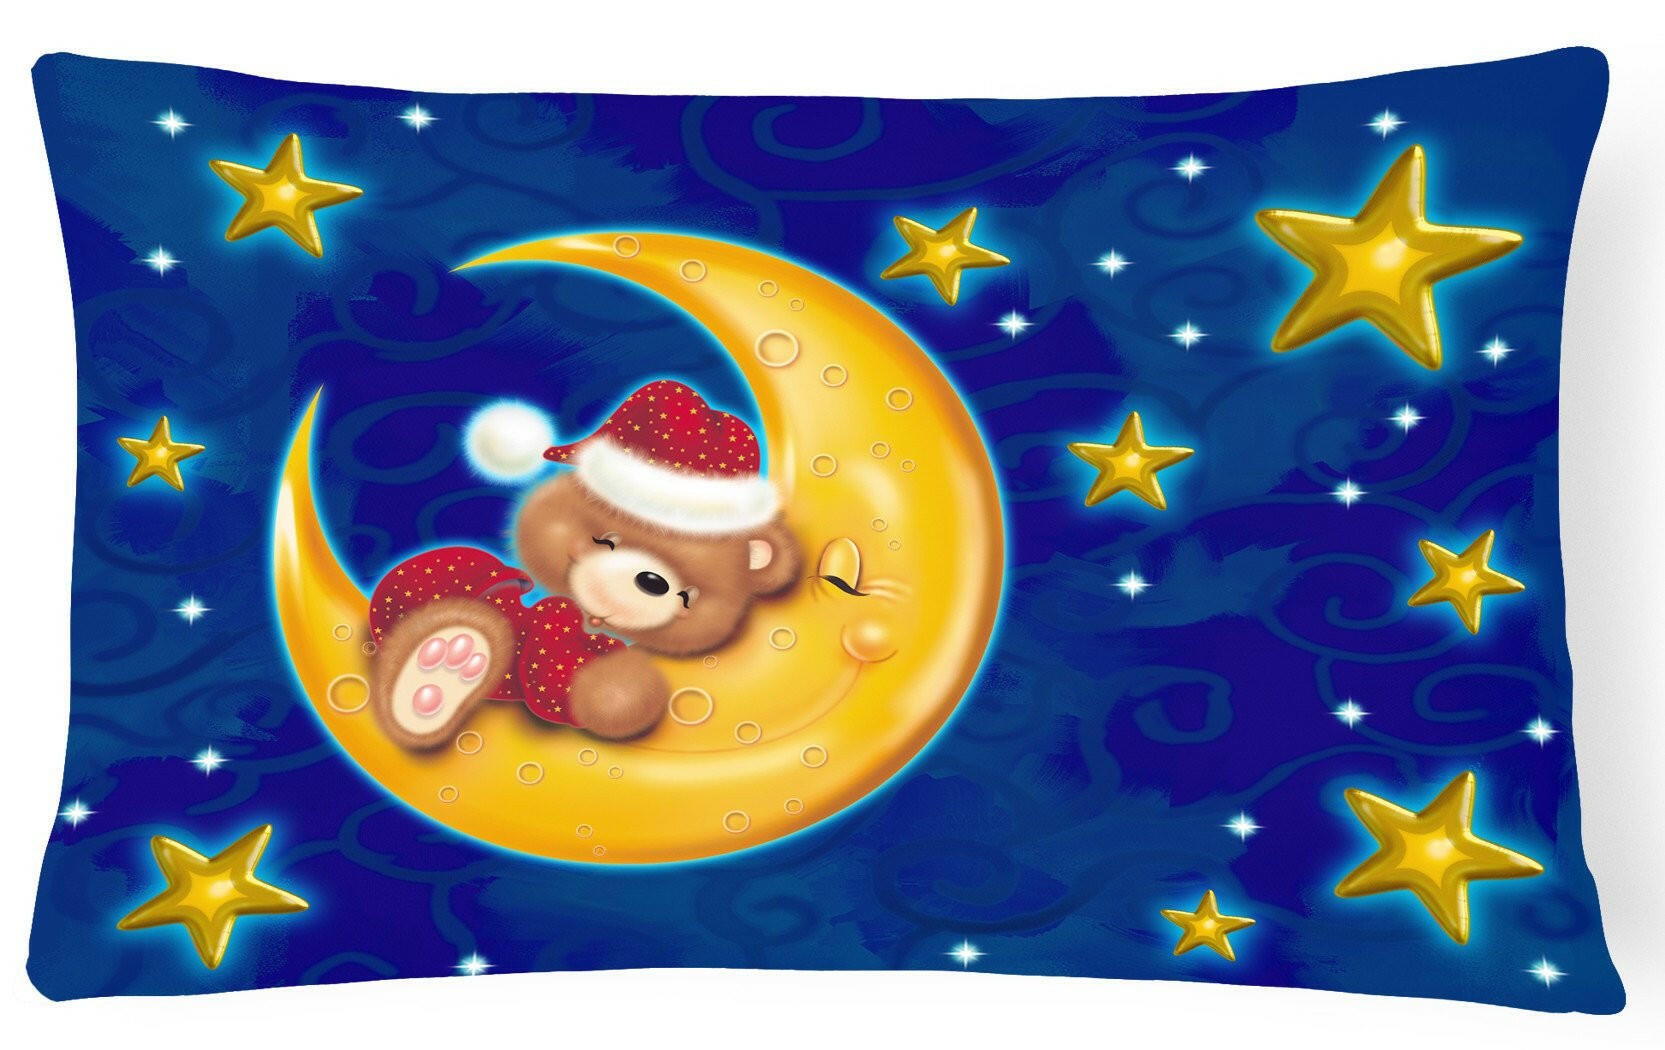 Bear Sleeping in the Moon and Stars Fabric Decorative Pillow APH514BPW1216 by Caroline's Treasures